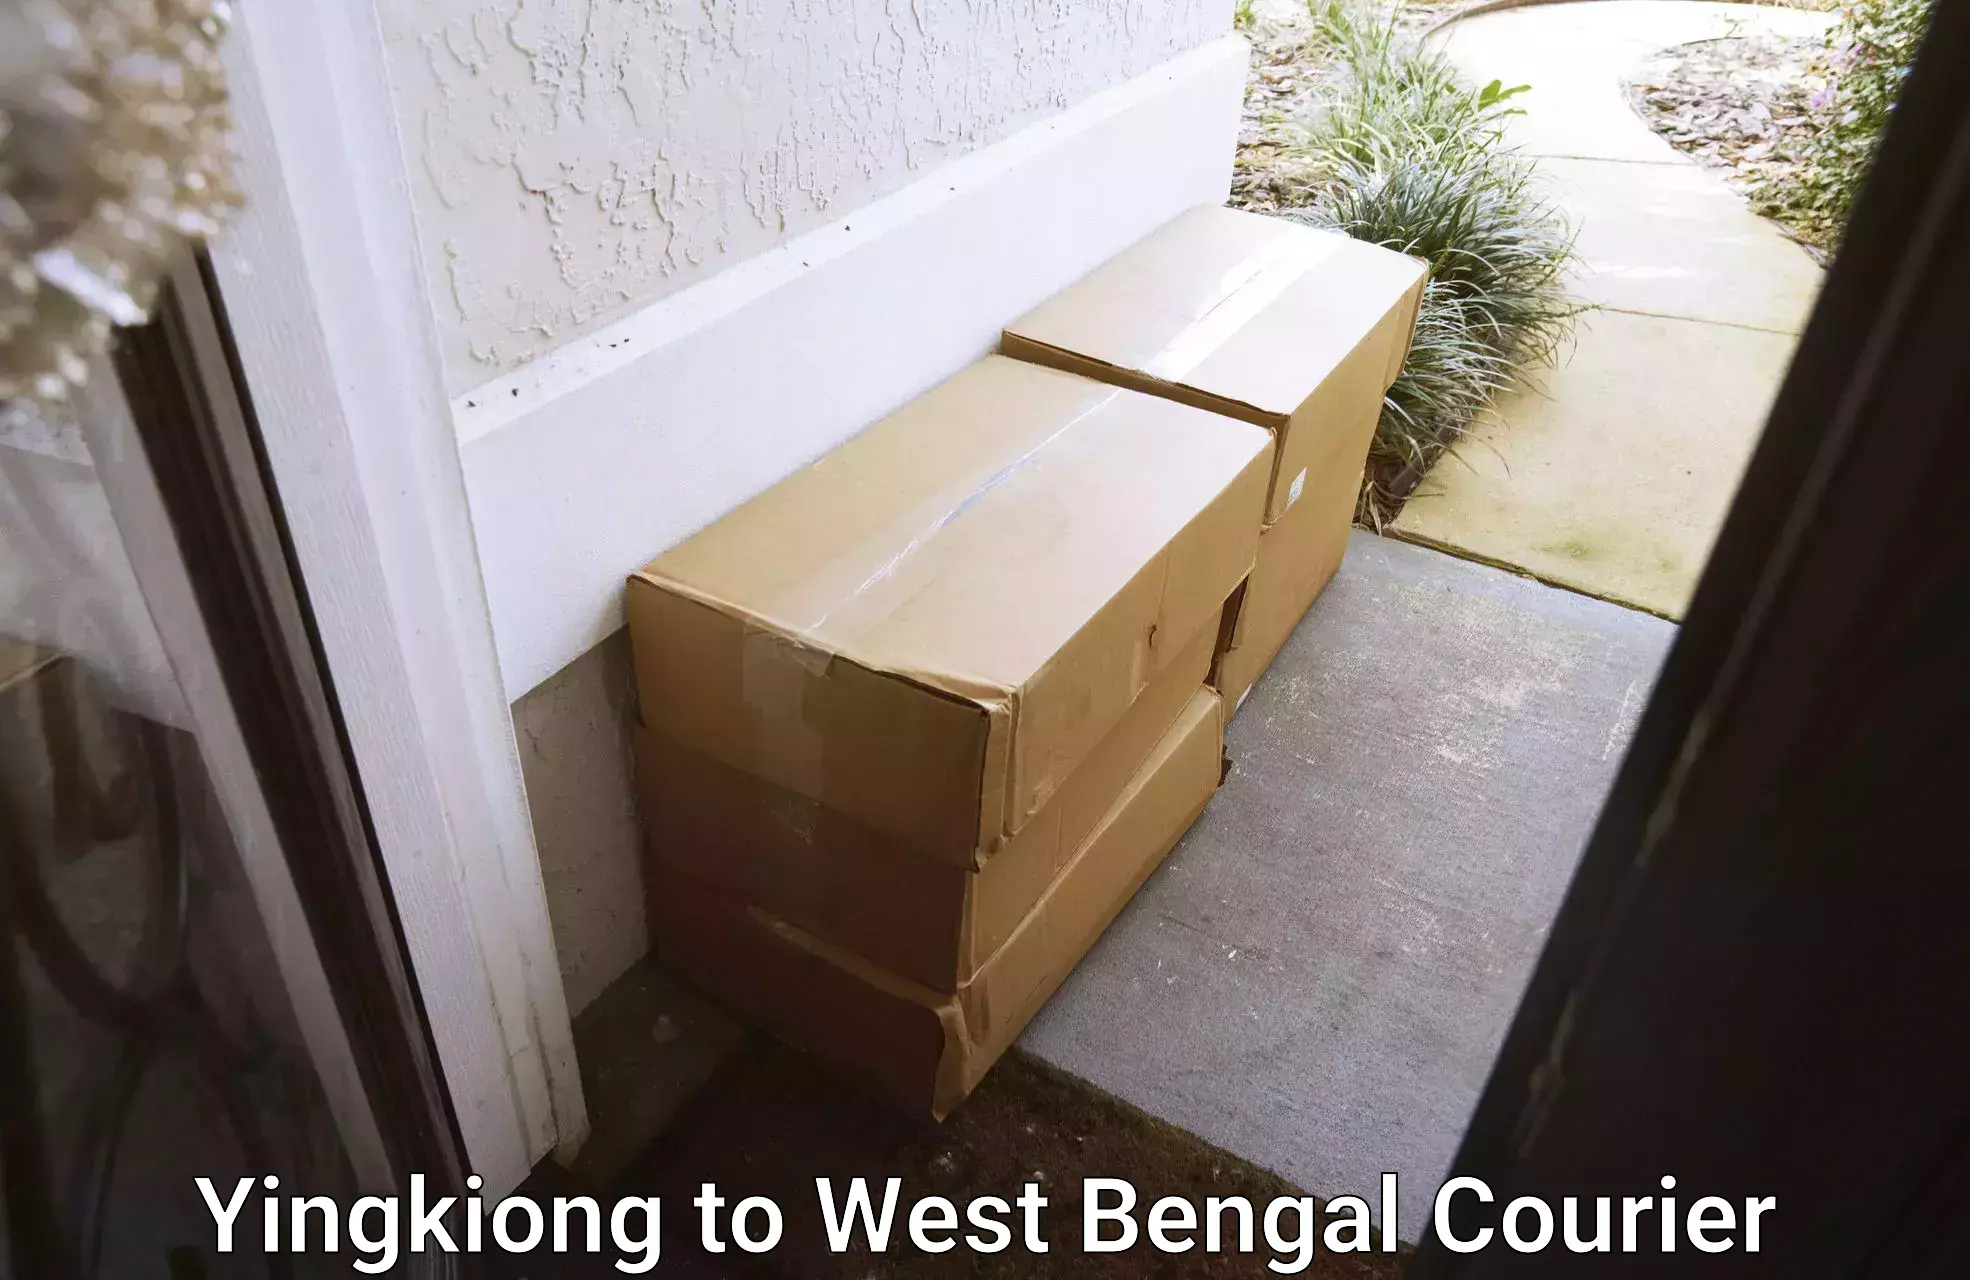 Courier service comparison Yingkiong to West Bengal